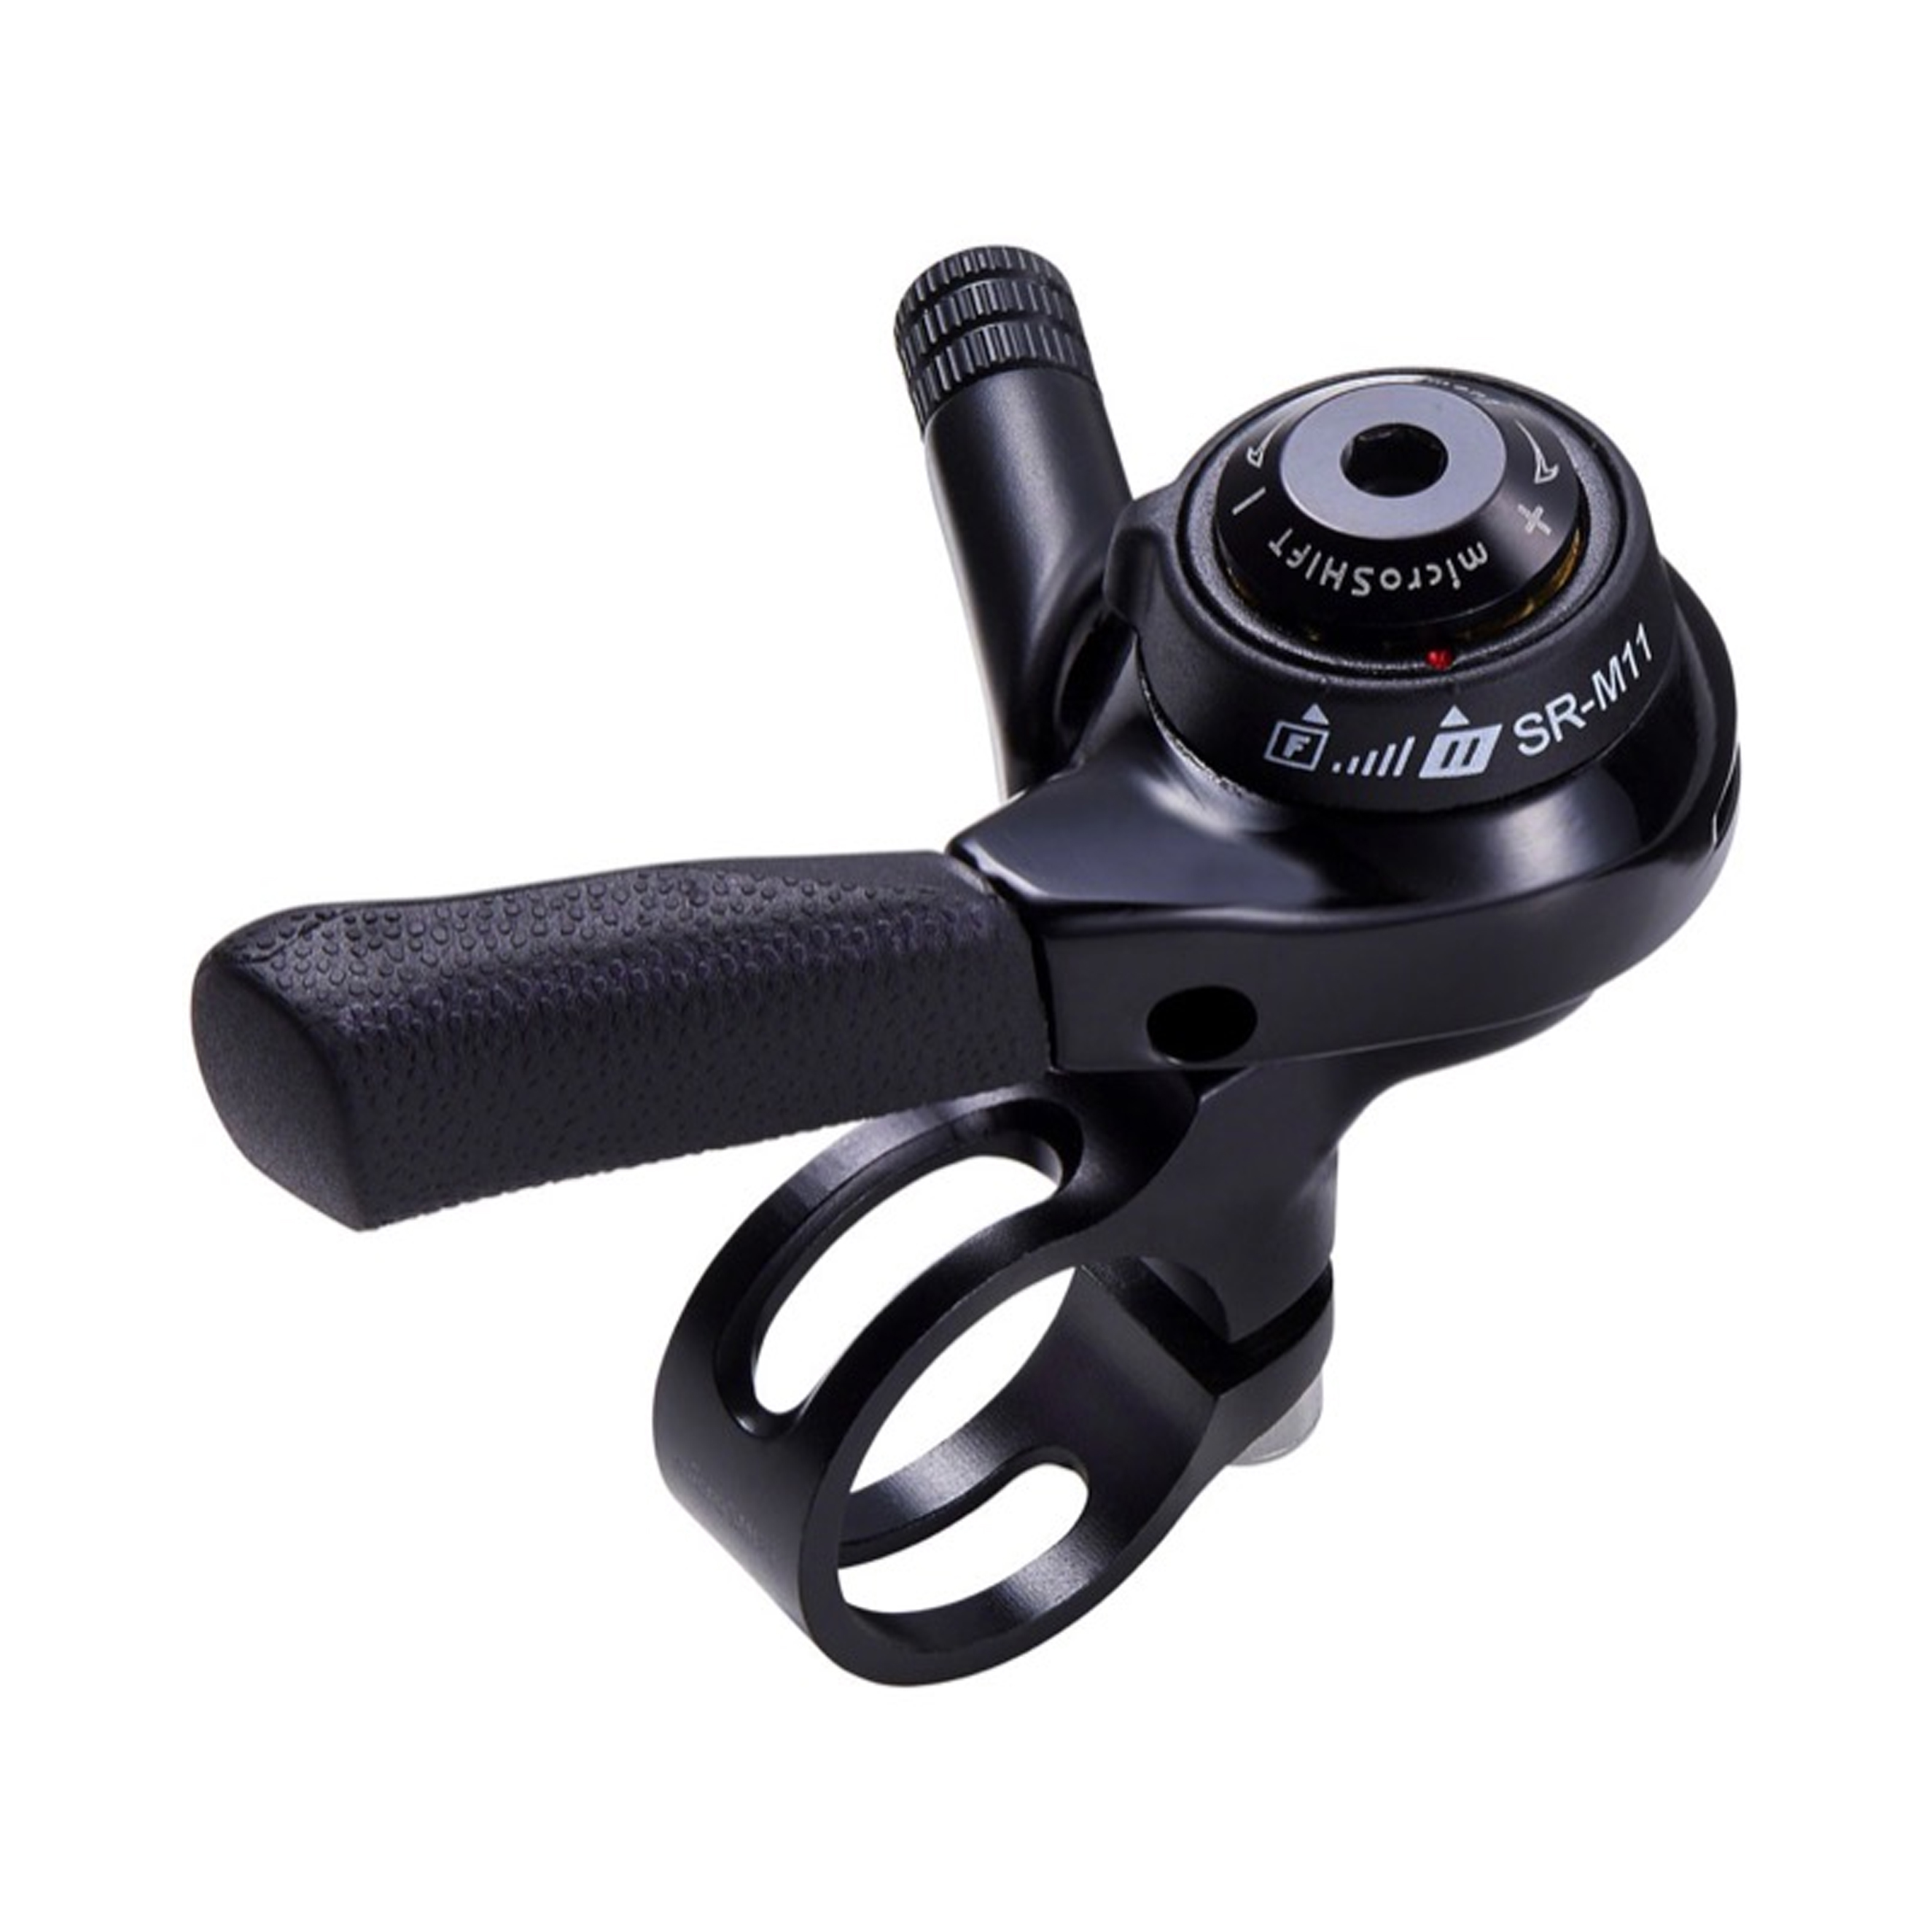 Shimano XT Right Shifter M8000 for 11spd W/O Optical Gear Display Black 1pc New 